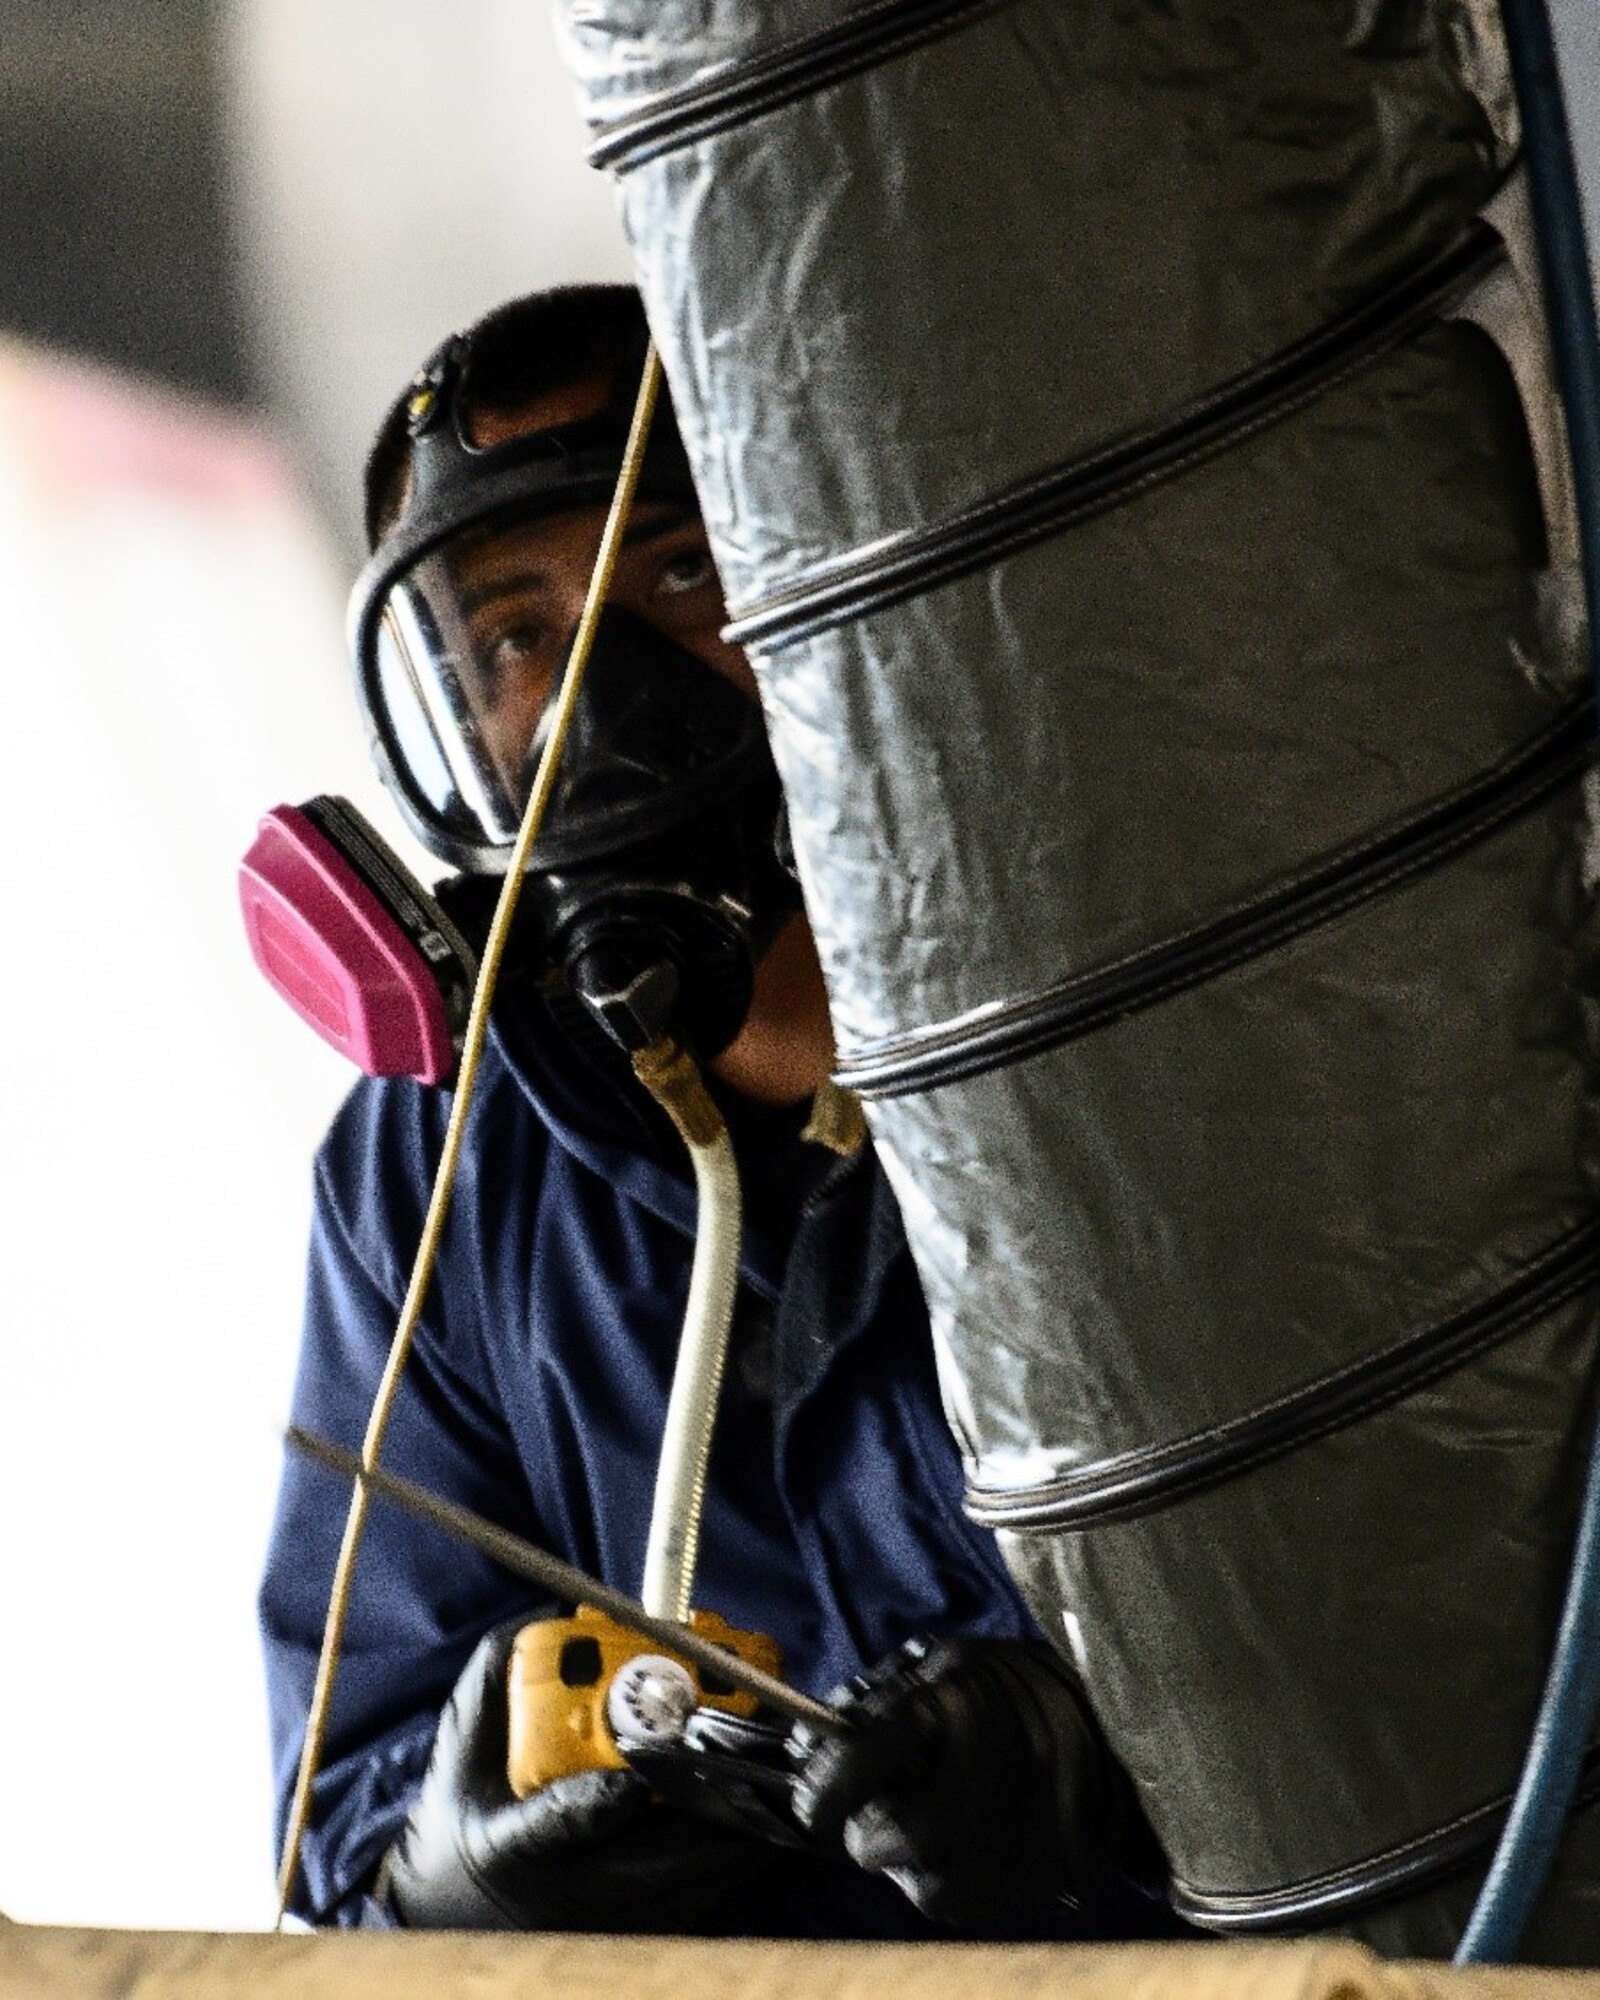 An Airman in a respirator looks up at a long tube that's feeding into the compartment of an aircraft.